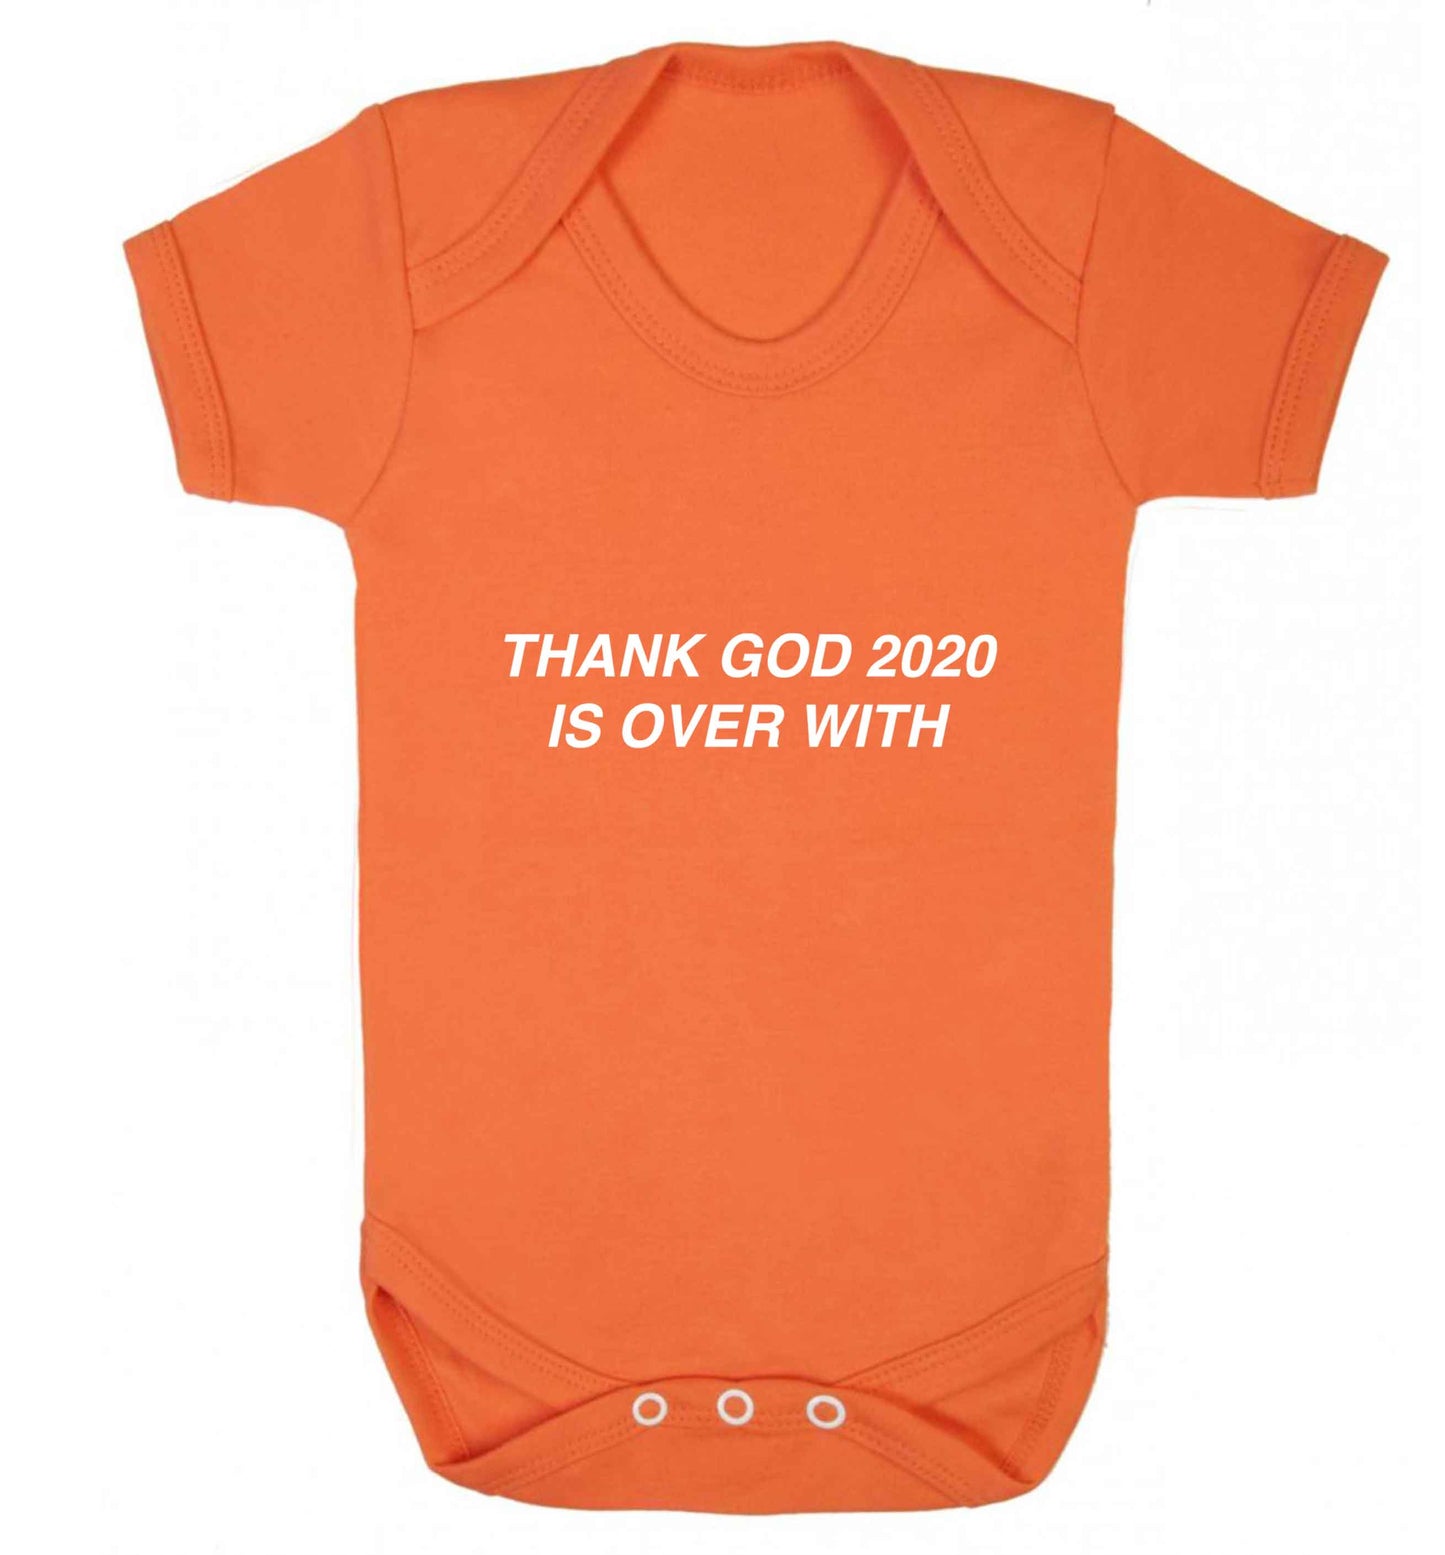 Thank god 2020 is over with baby vest orange 18-24 months